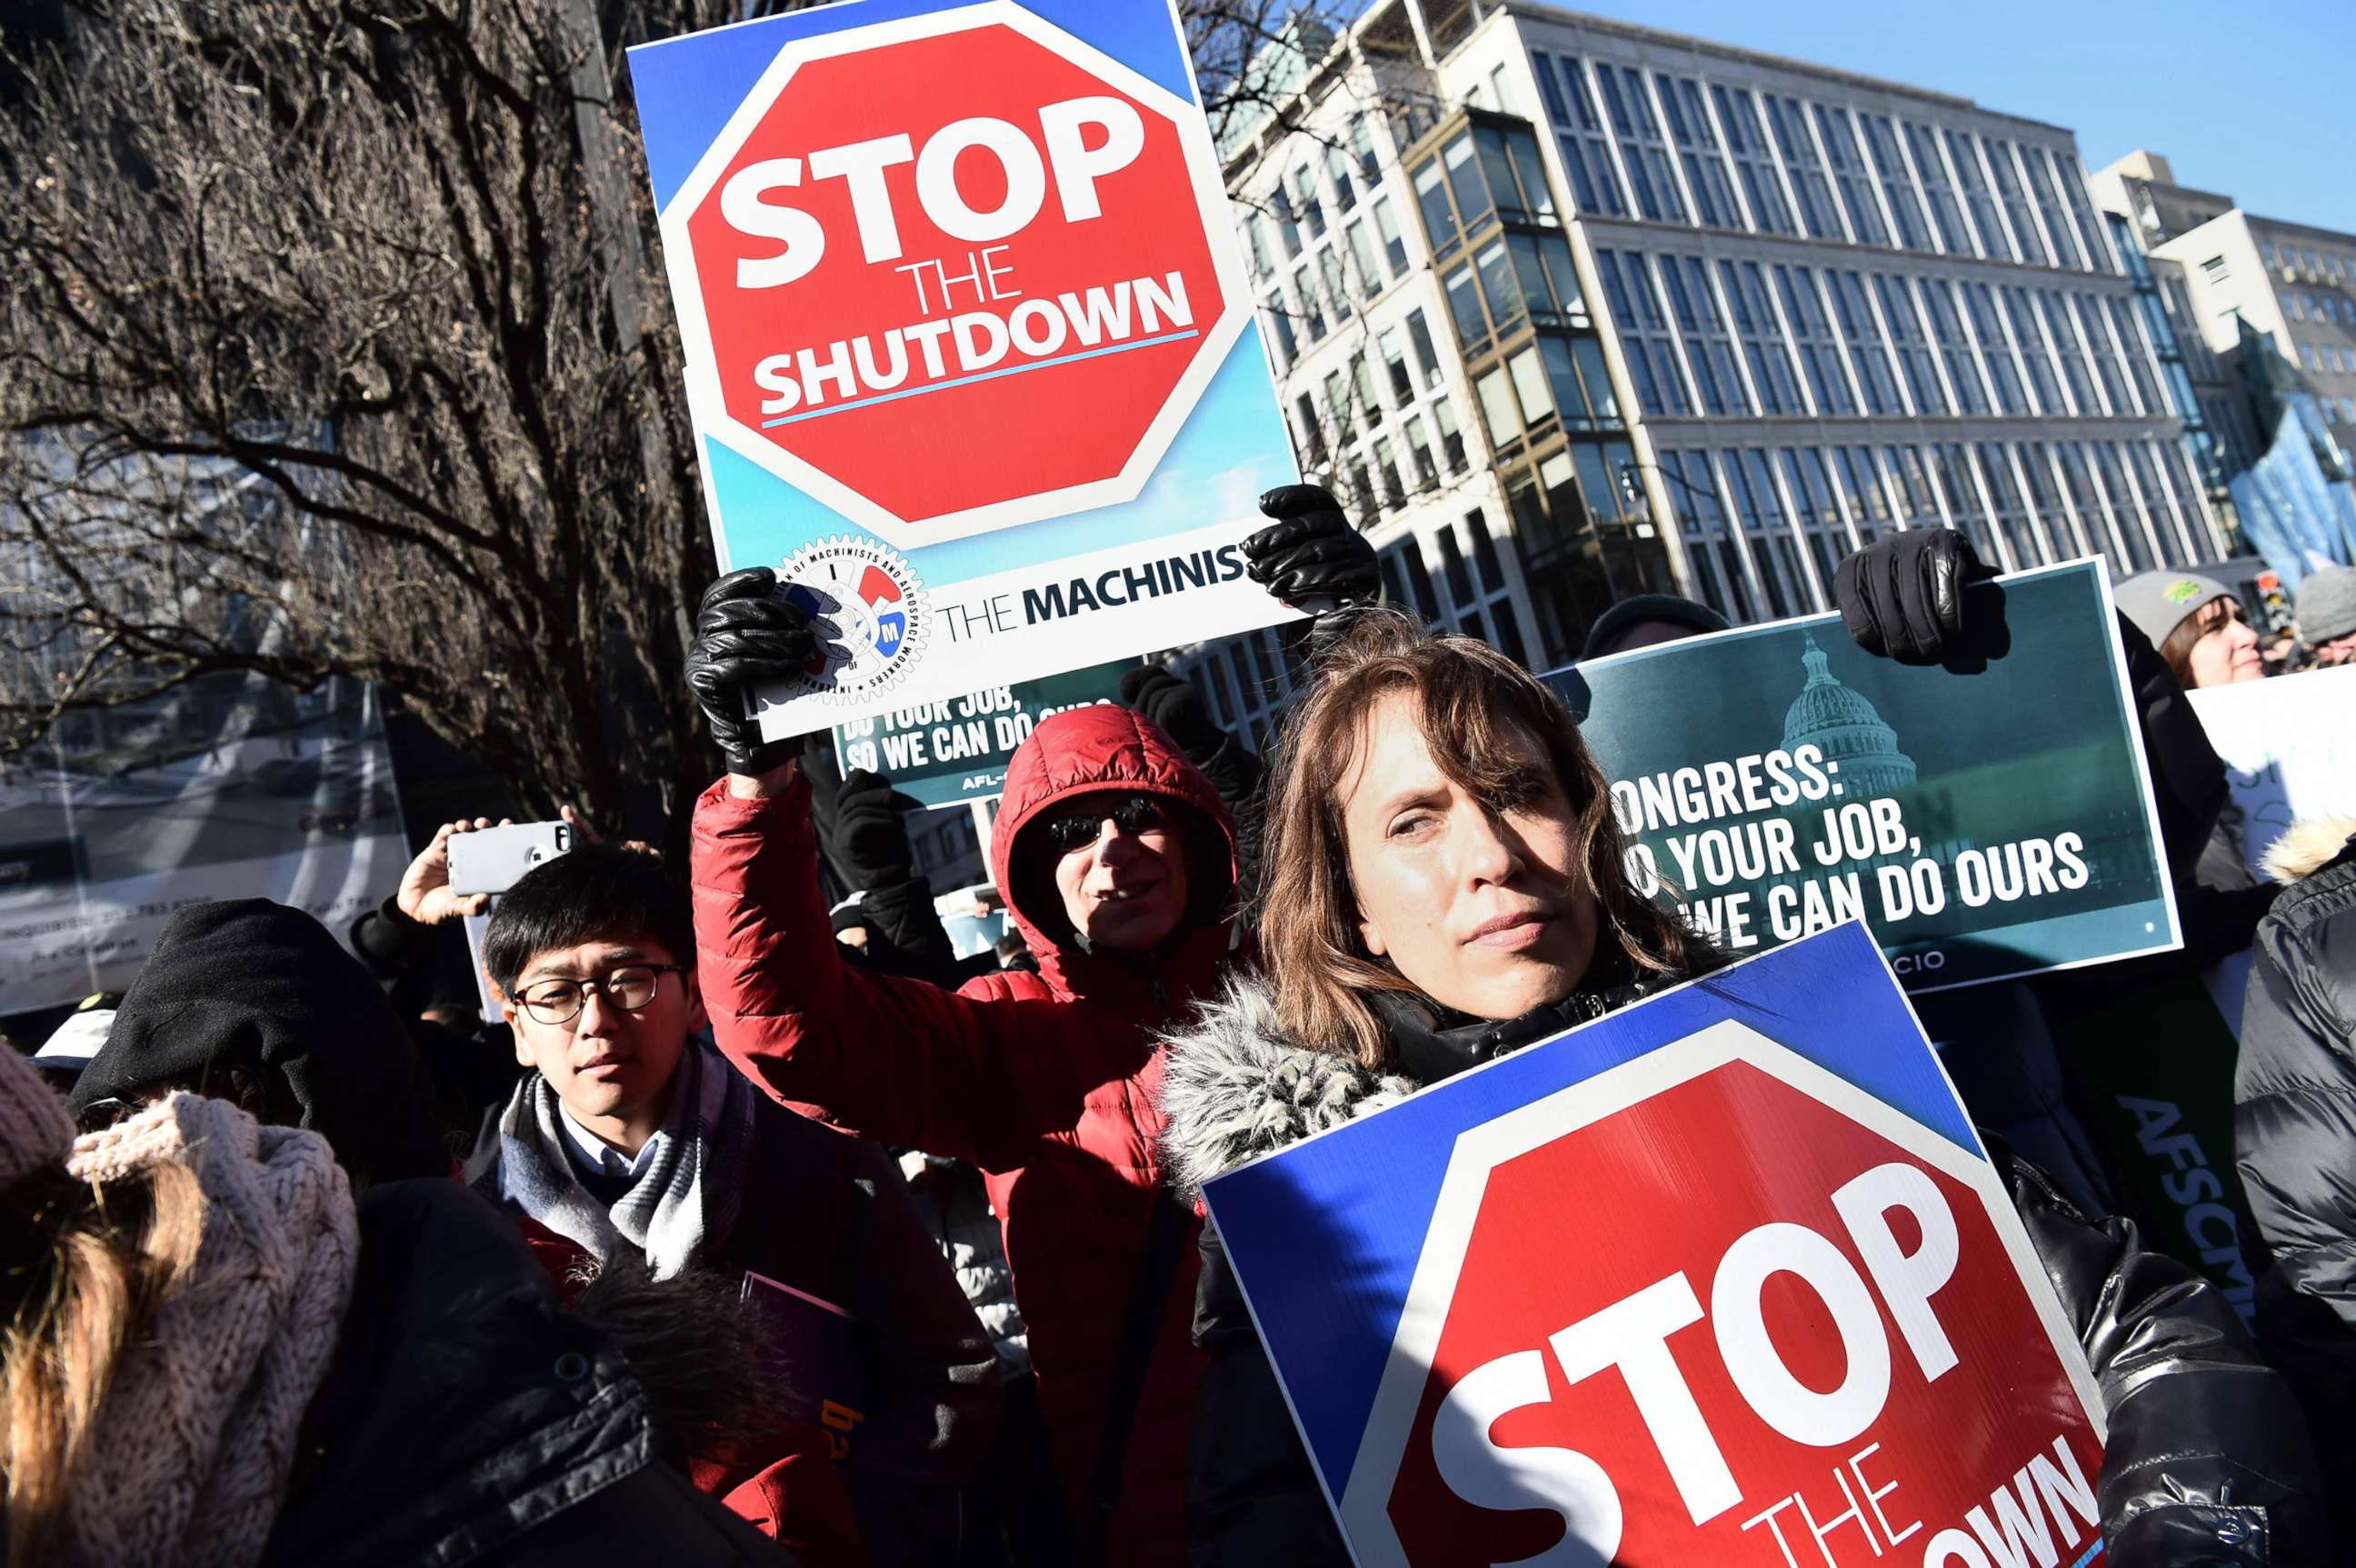 PHOTO: Union workers demonstrate against the government shutdown, Jan. 10, 2019, in Washington, D.C.